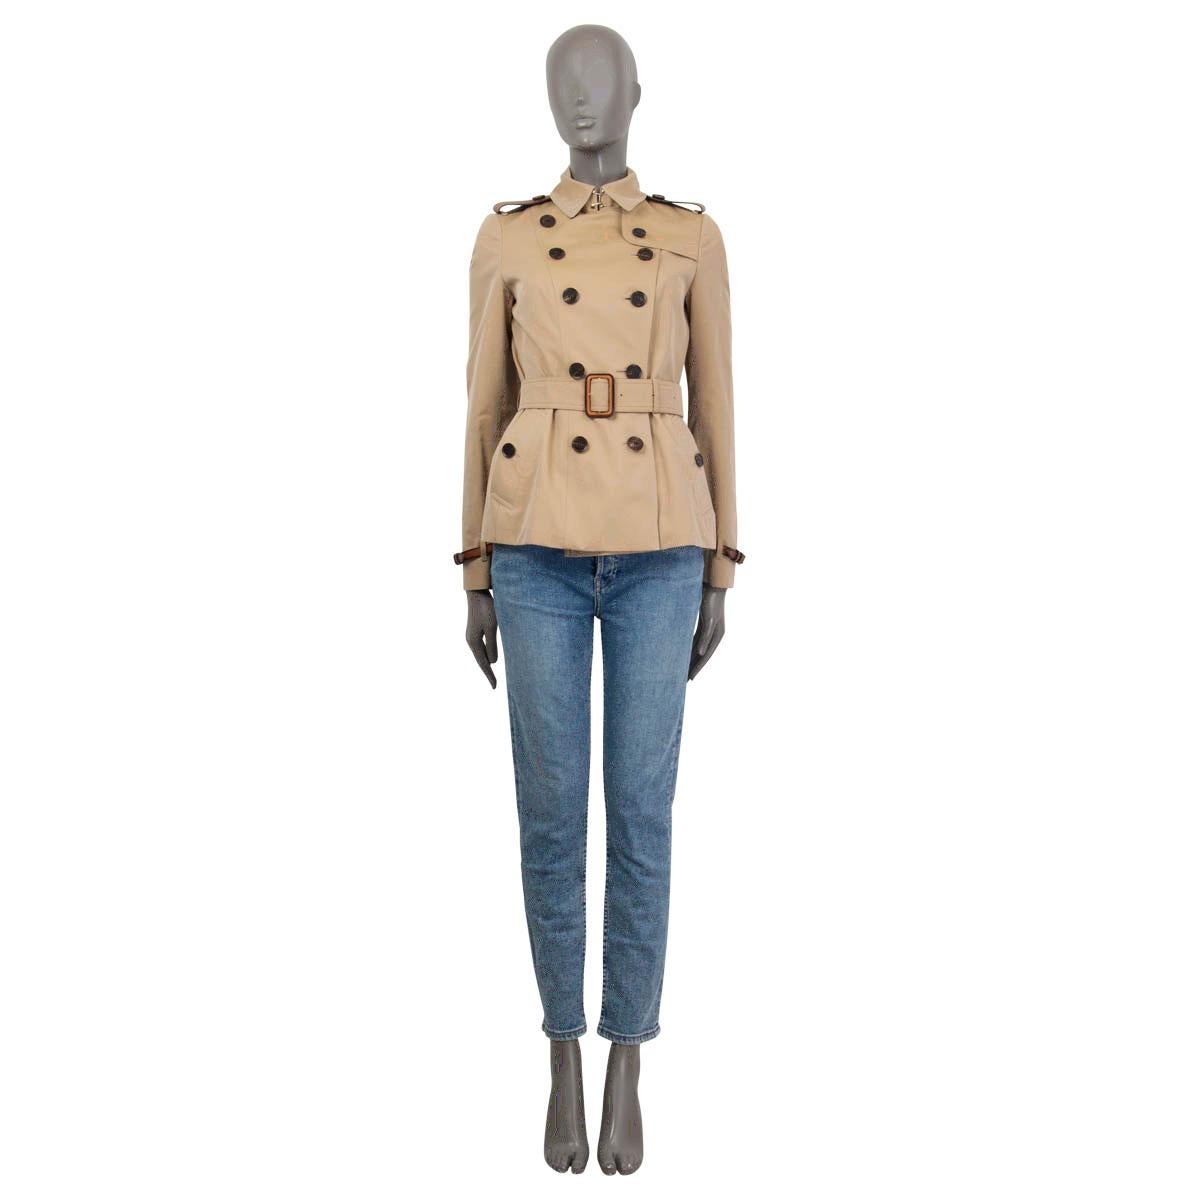 100% authentic Burberry Prorsum belted double breasted trench jacket in beige and tan cotton (100%). Embellished with leather epaulettes at the shoulders and the cuffs. Closes with one hook at the neck, six buttons on the front and a belt at the